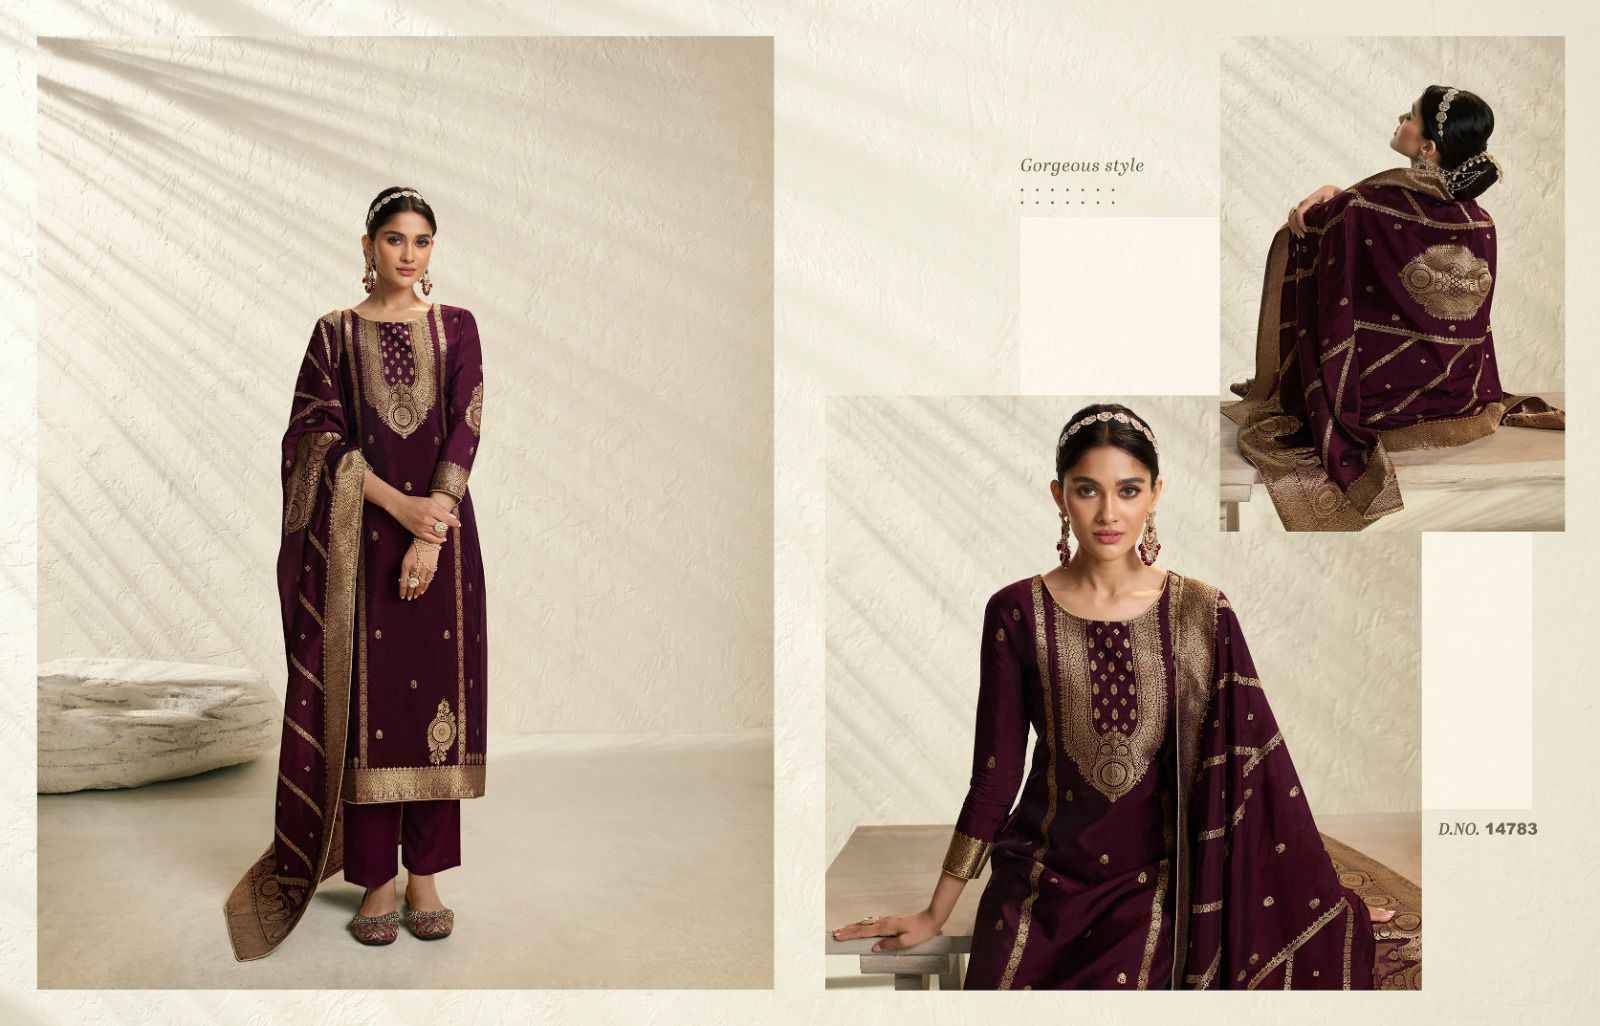 Silky Vol-3 By Zisa 14781 To 14786 Series Beautiful Fetsive Suits Stylish Fancy Colorful Casual Wear & Ethnic Wear Bemberg Silk Jacquard Dresses At Wholesale Price